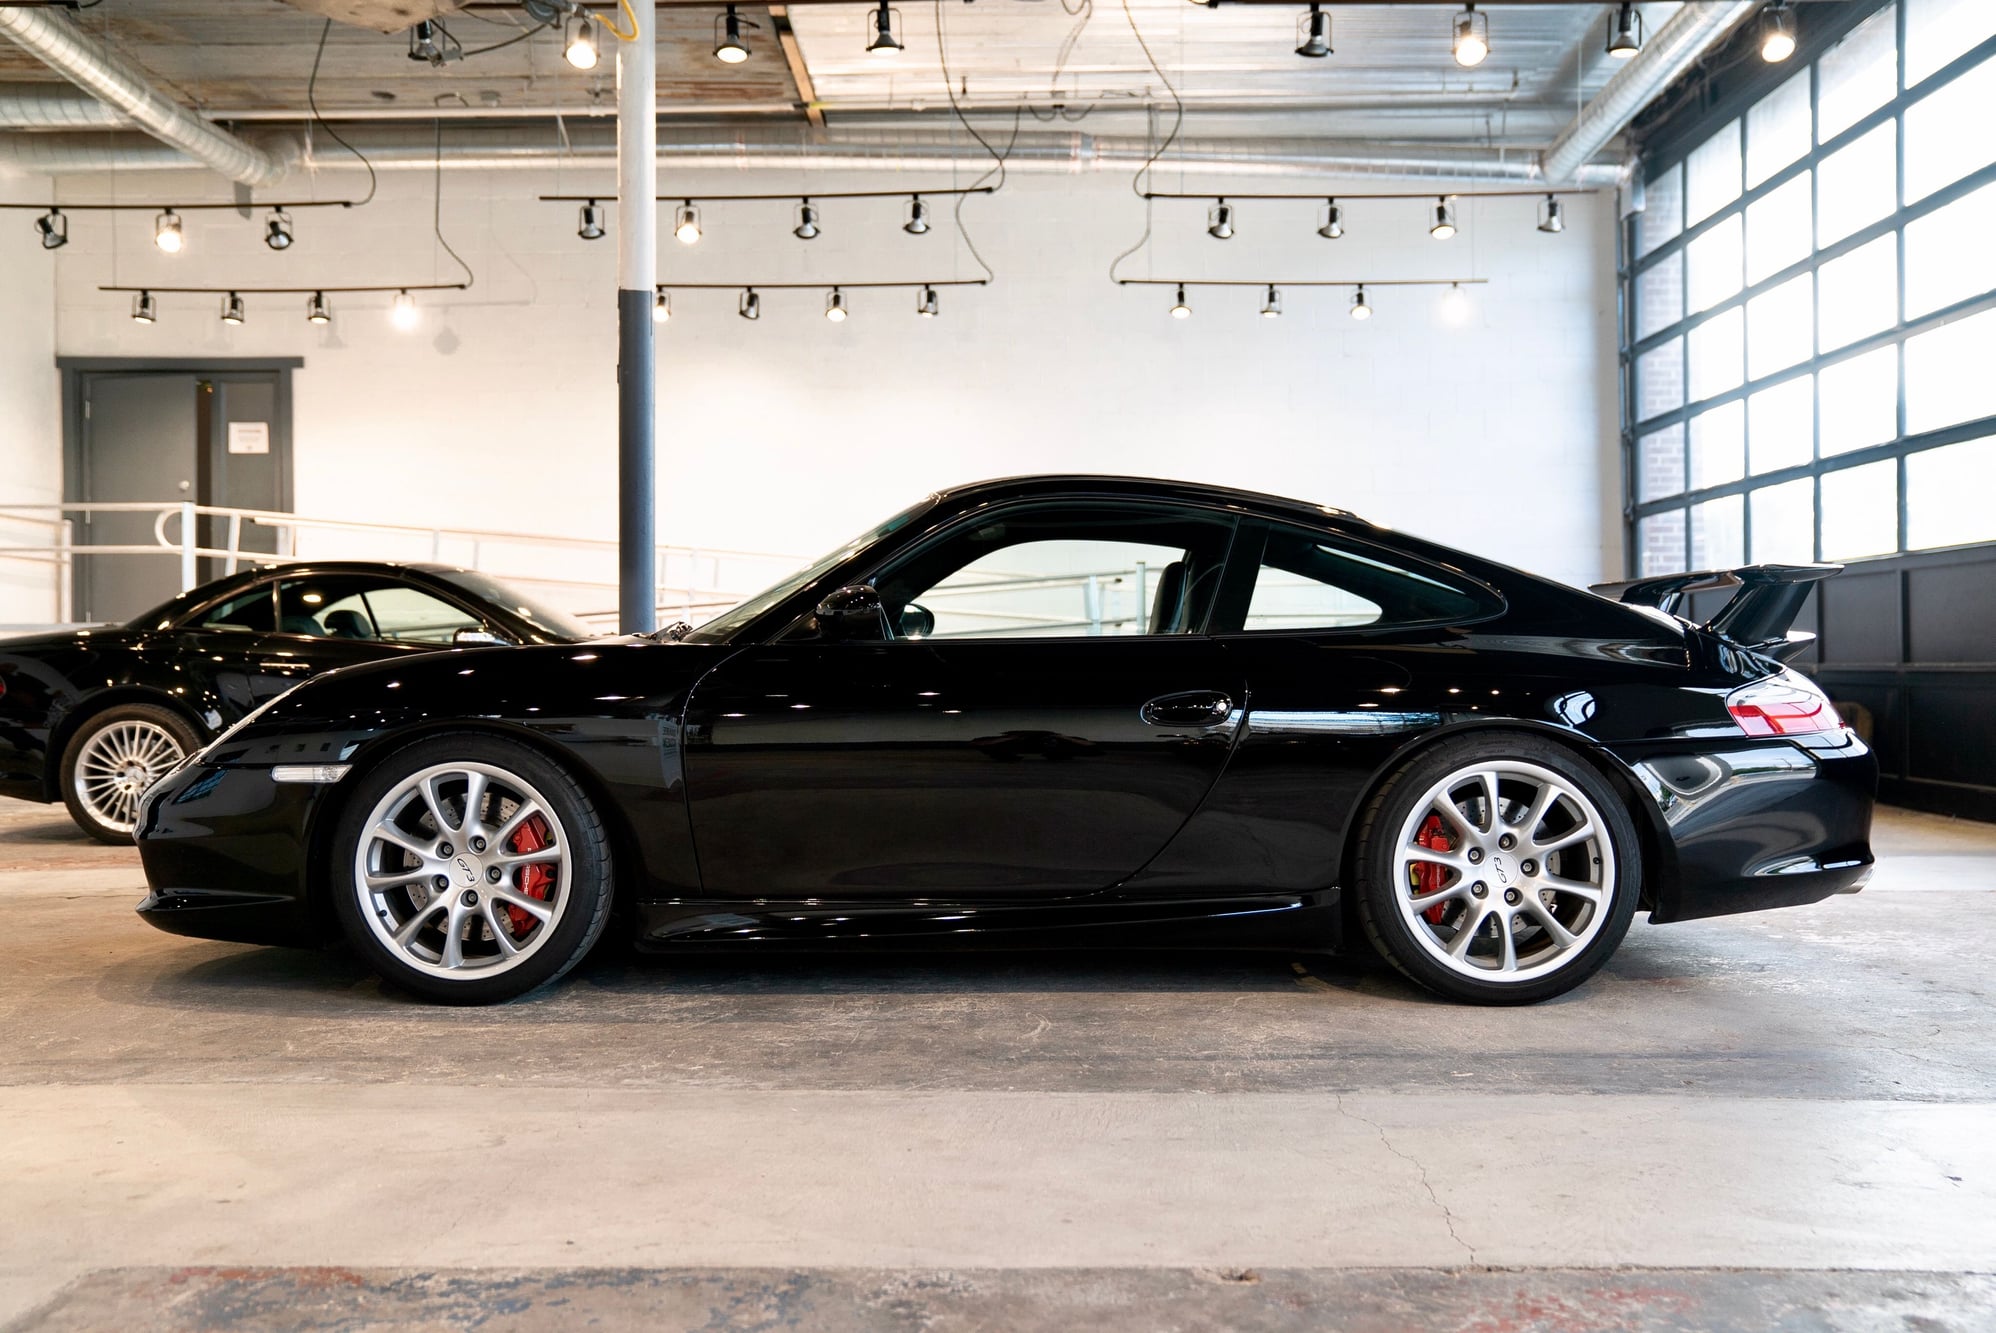 2004 Porsche GT3 - 2004 996.2 GT3 26K Miles Extremely Clean - Used - VIN WP0AC29904S692151 - 26,000 Miles - 6 cyl - 2WD - Manual - Coupe - Black - Salt Lake City, UT 84103, United States